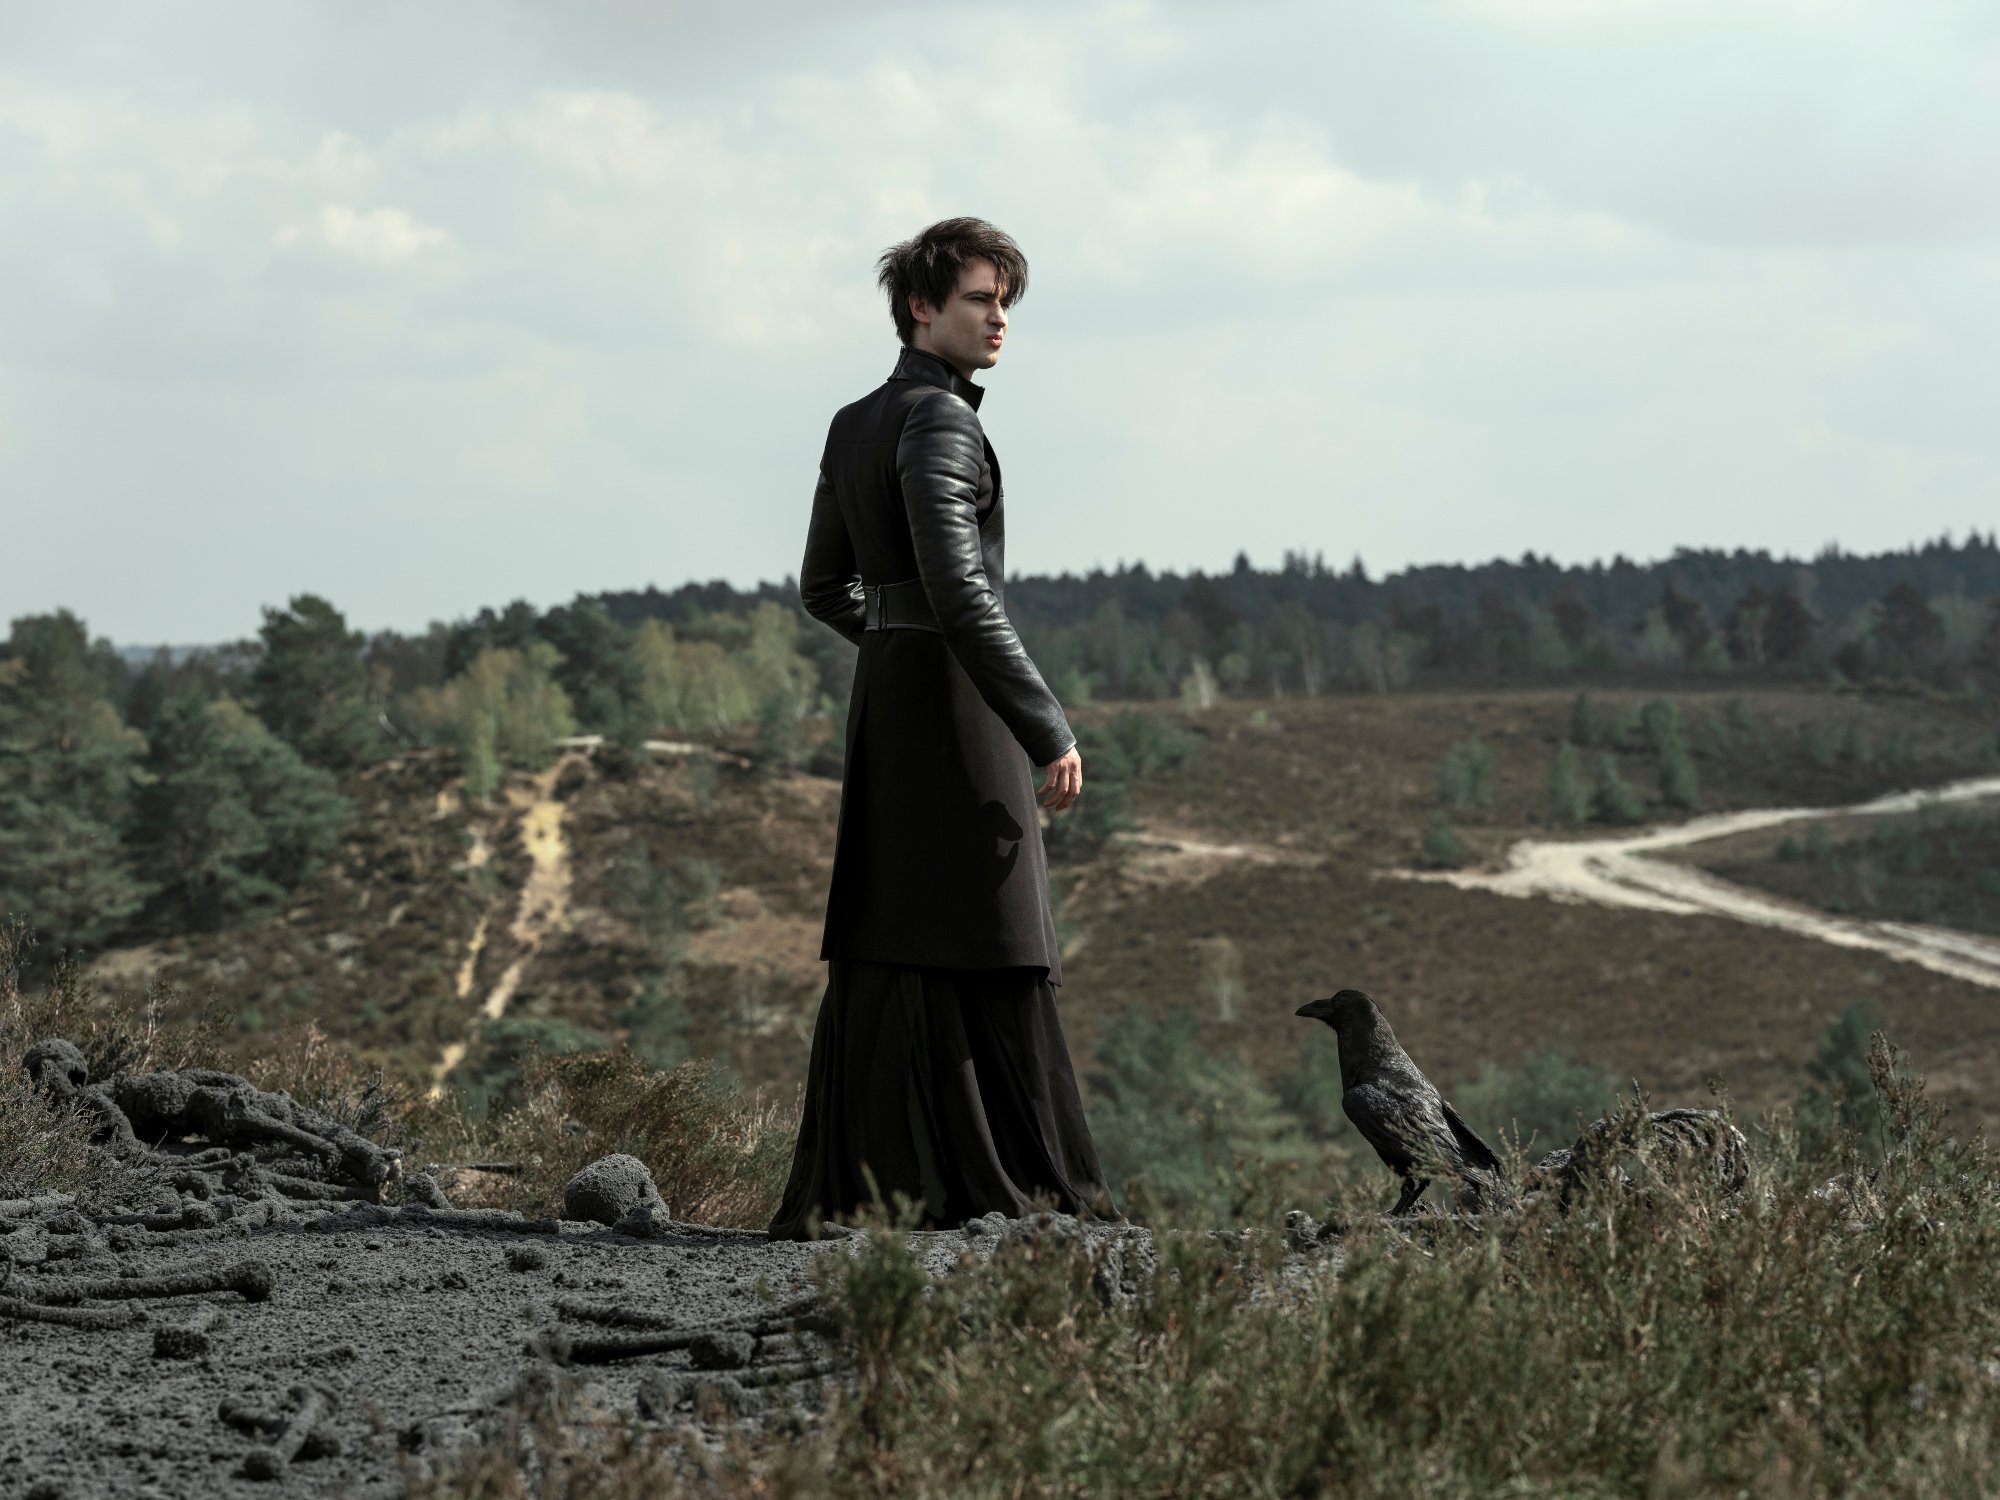 Tom Sturridge as Morpheus/Dream in 'The Sandman,' which is based on a comic book series. He's wearing a long, black coat and standing before a field. Matthew the Raven is next to him.